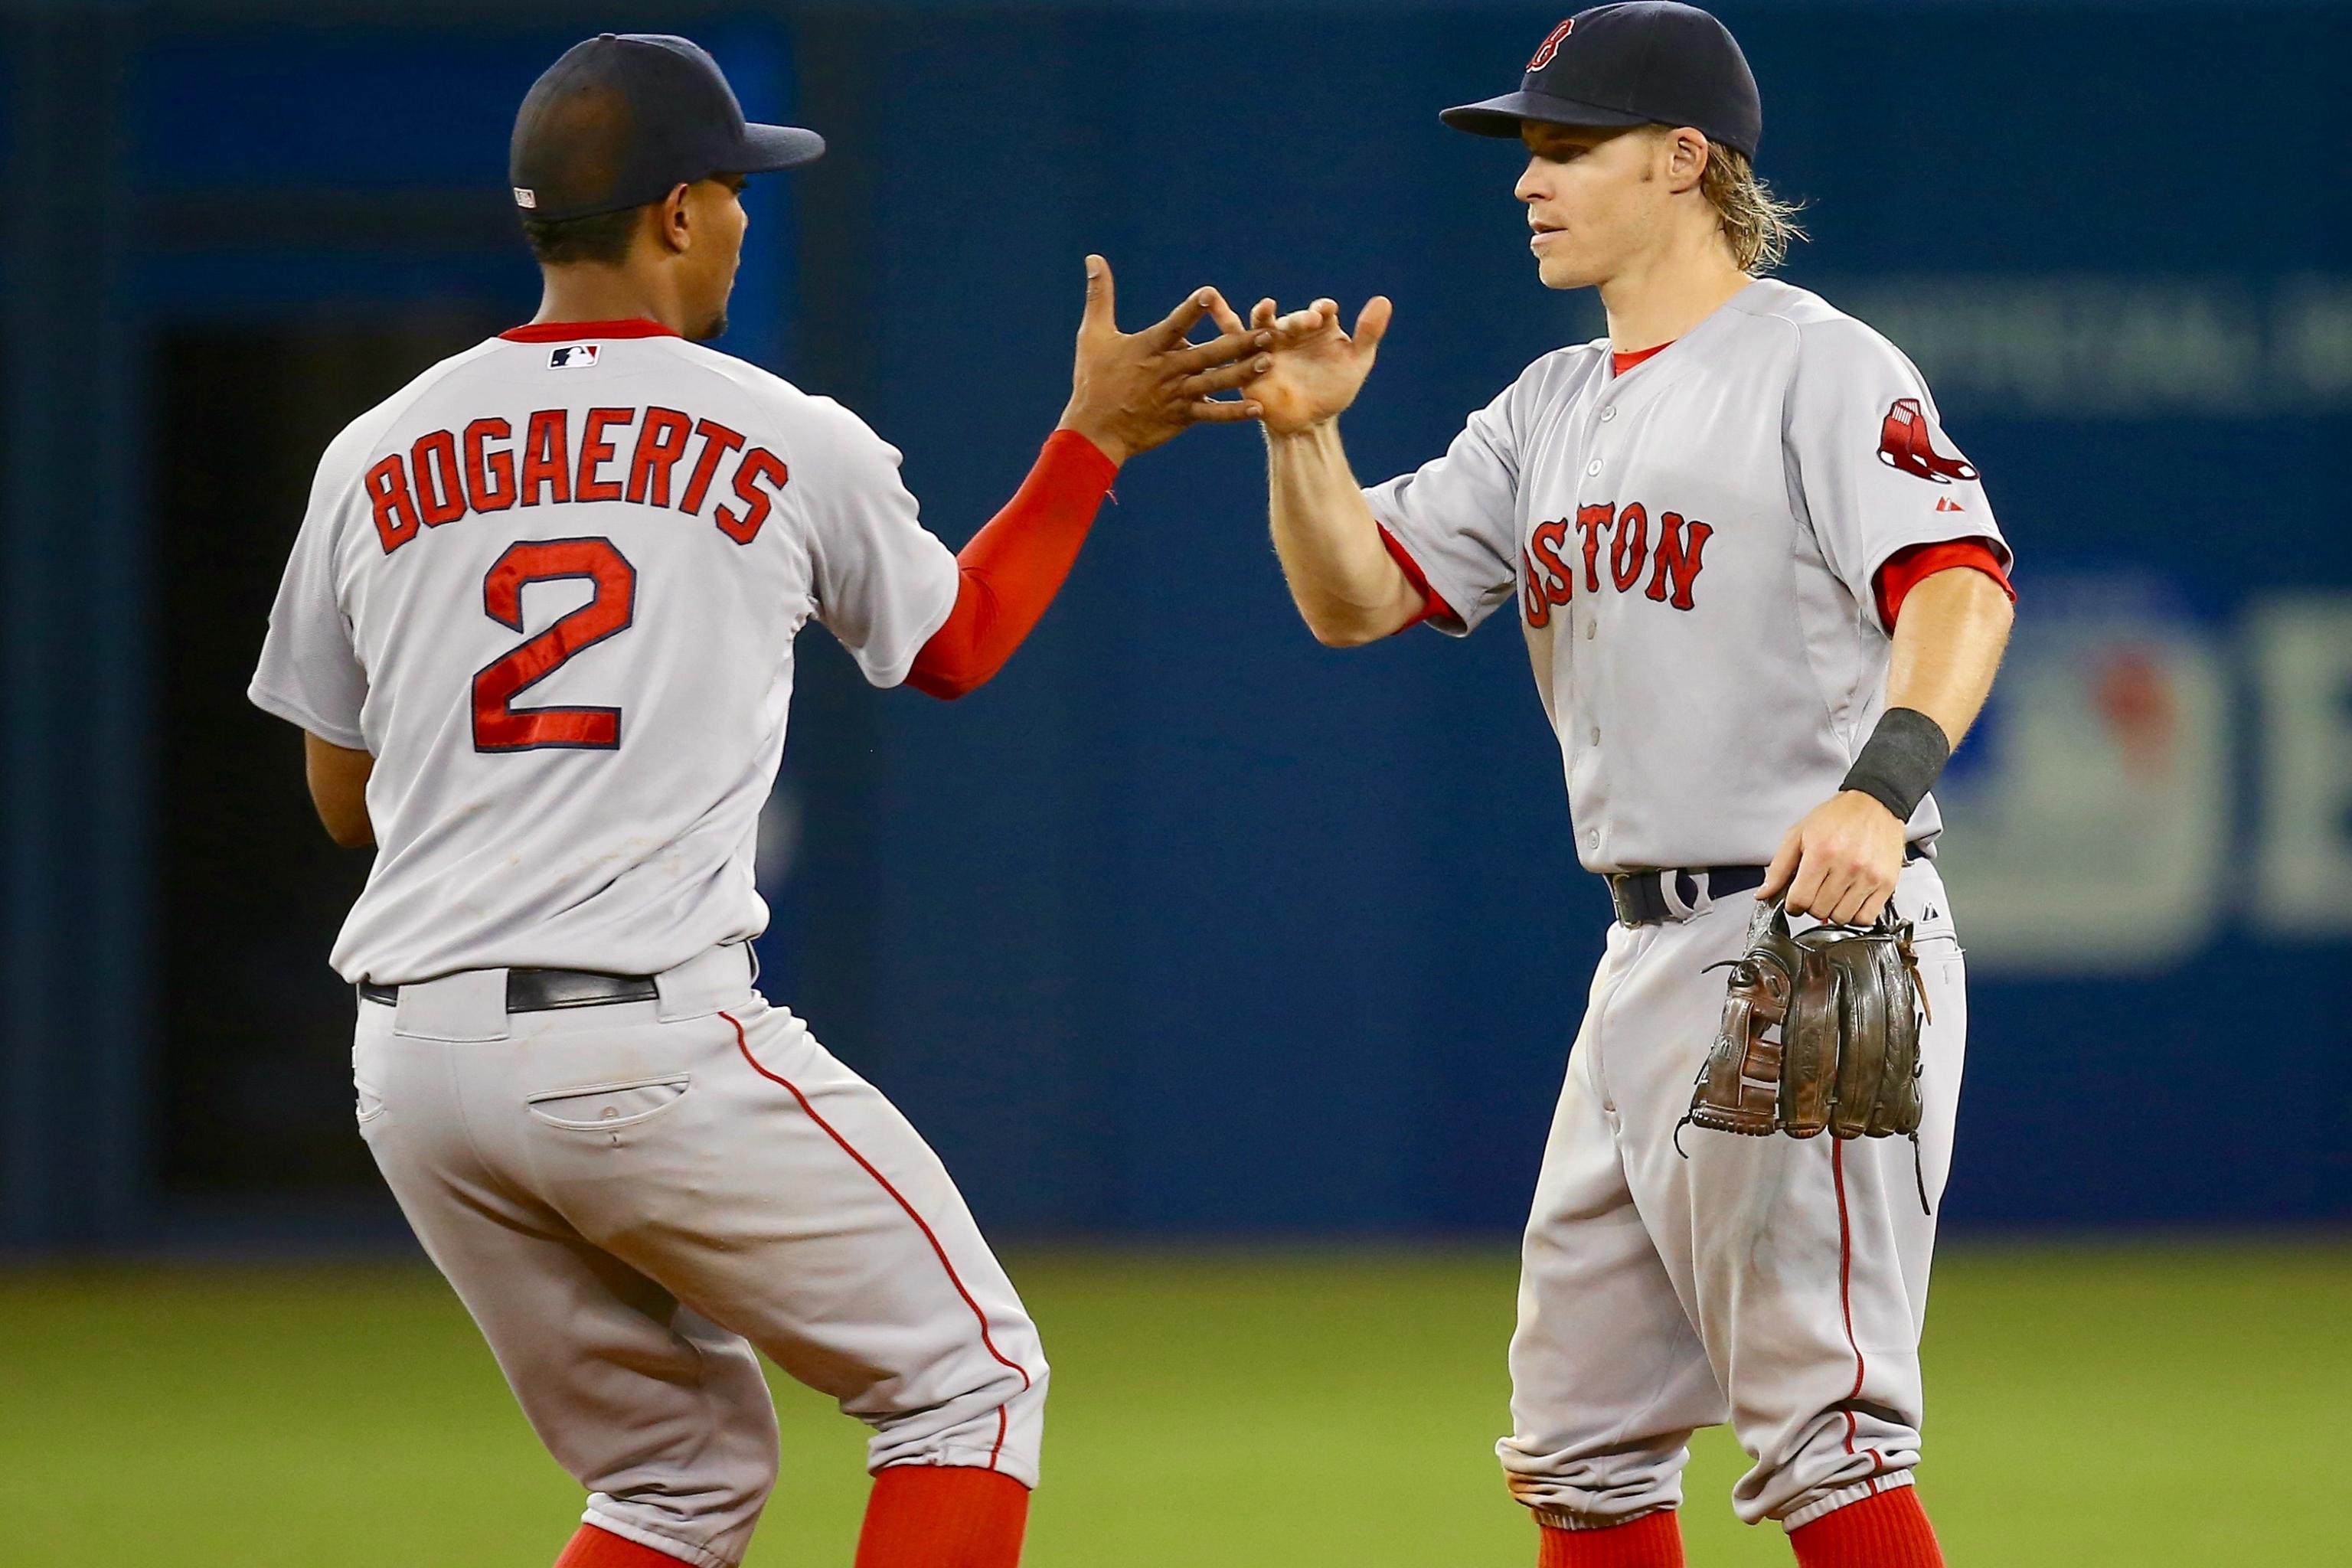 Mastrodonato: Red Sox starting rotation looks about average